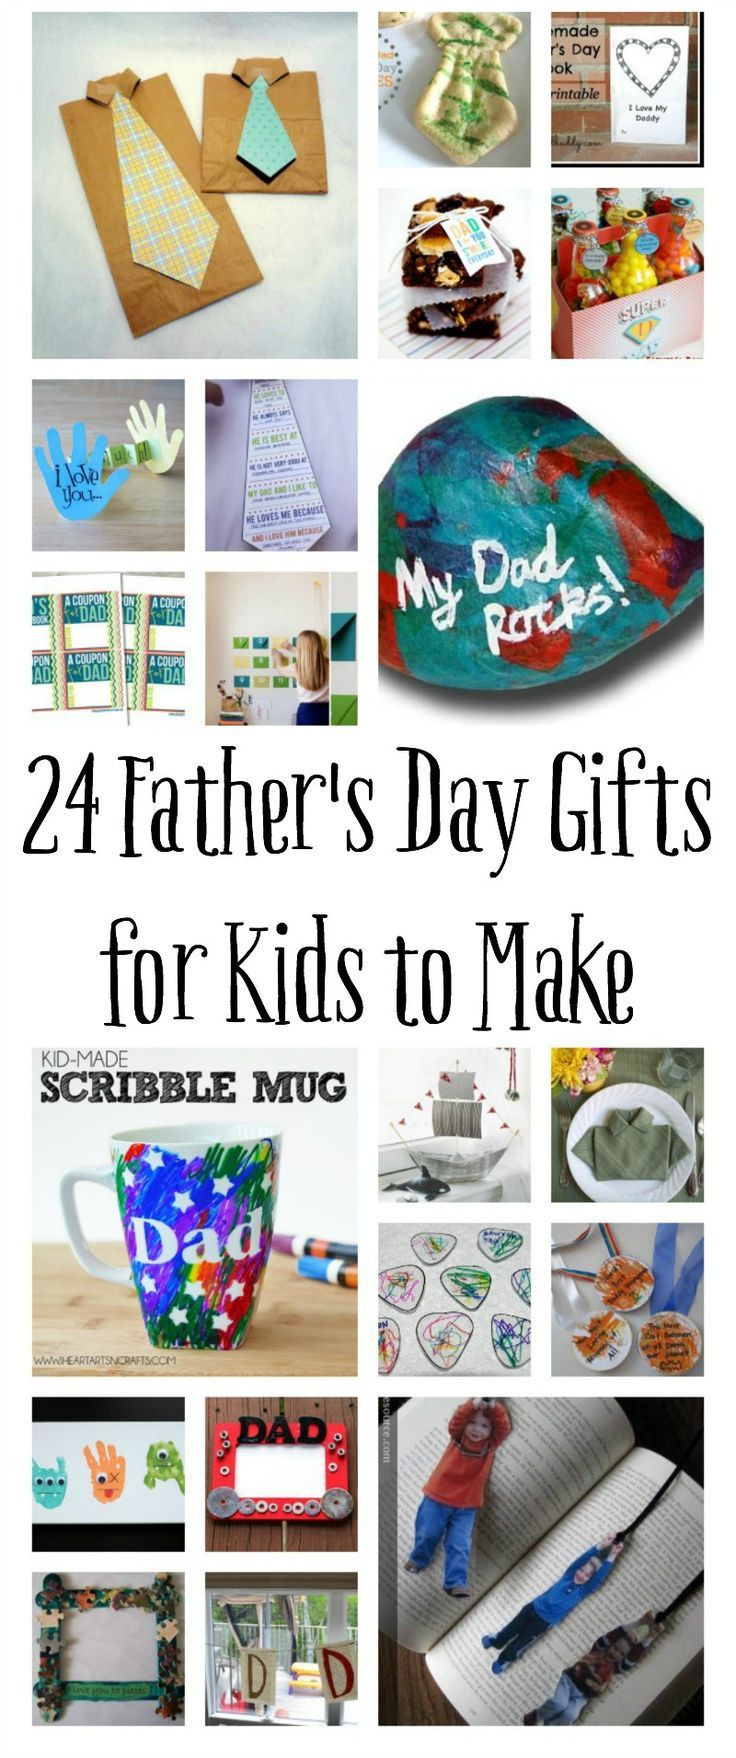 Mother'S Day Gift Ideas For Kids To Make
 100 Homemade Father s Day Gifts for Kids to Make